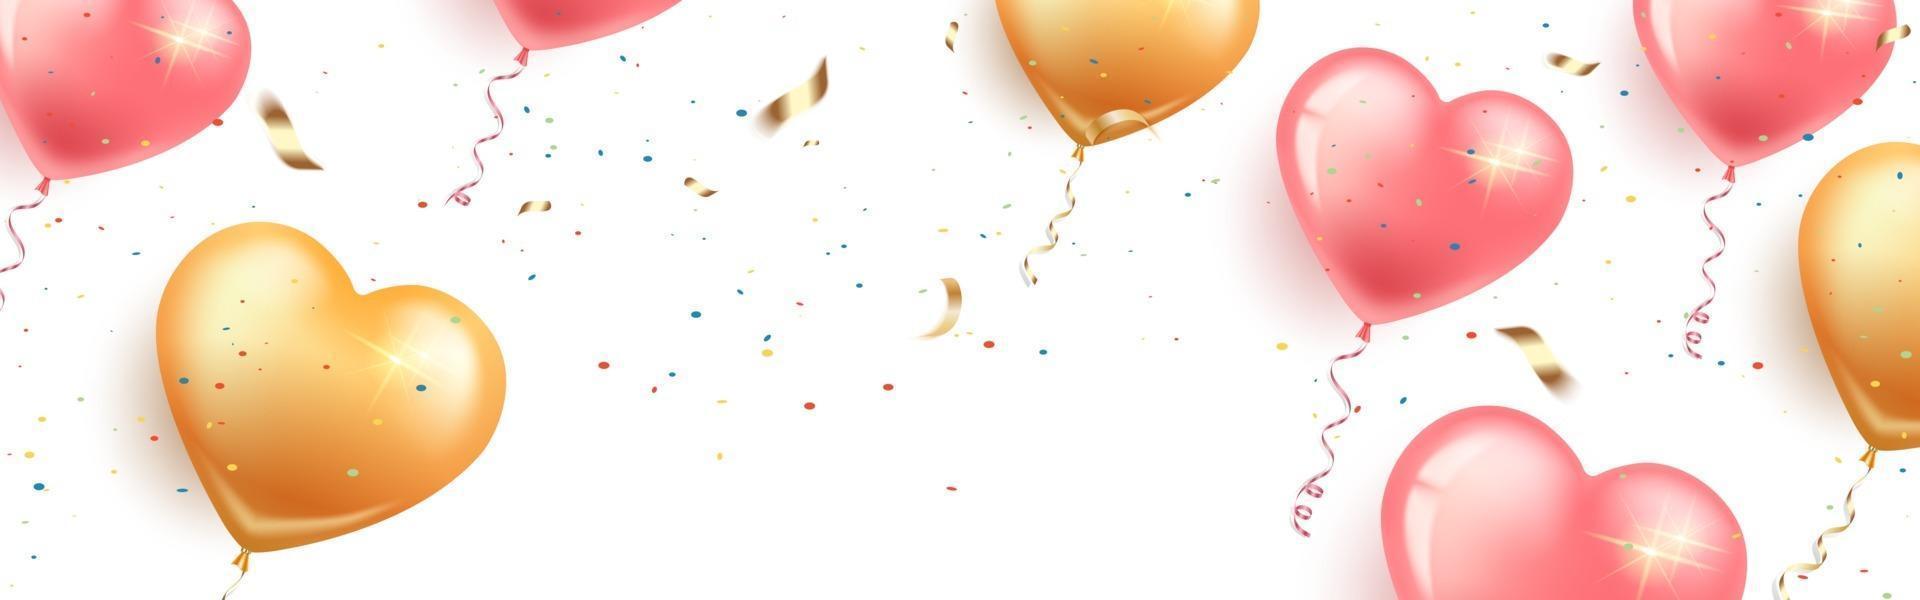 Festive horizontal banner with pink and gold heart-shaped balloons, confetti and serpentine. Card Happy Birthday, Women's Day, Valentine's Day, Wedding. Isolated white background. Vector